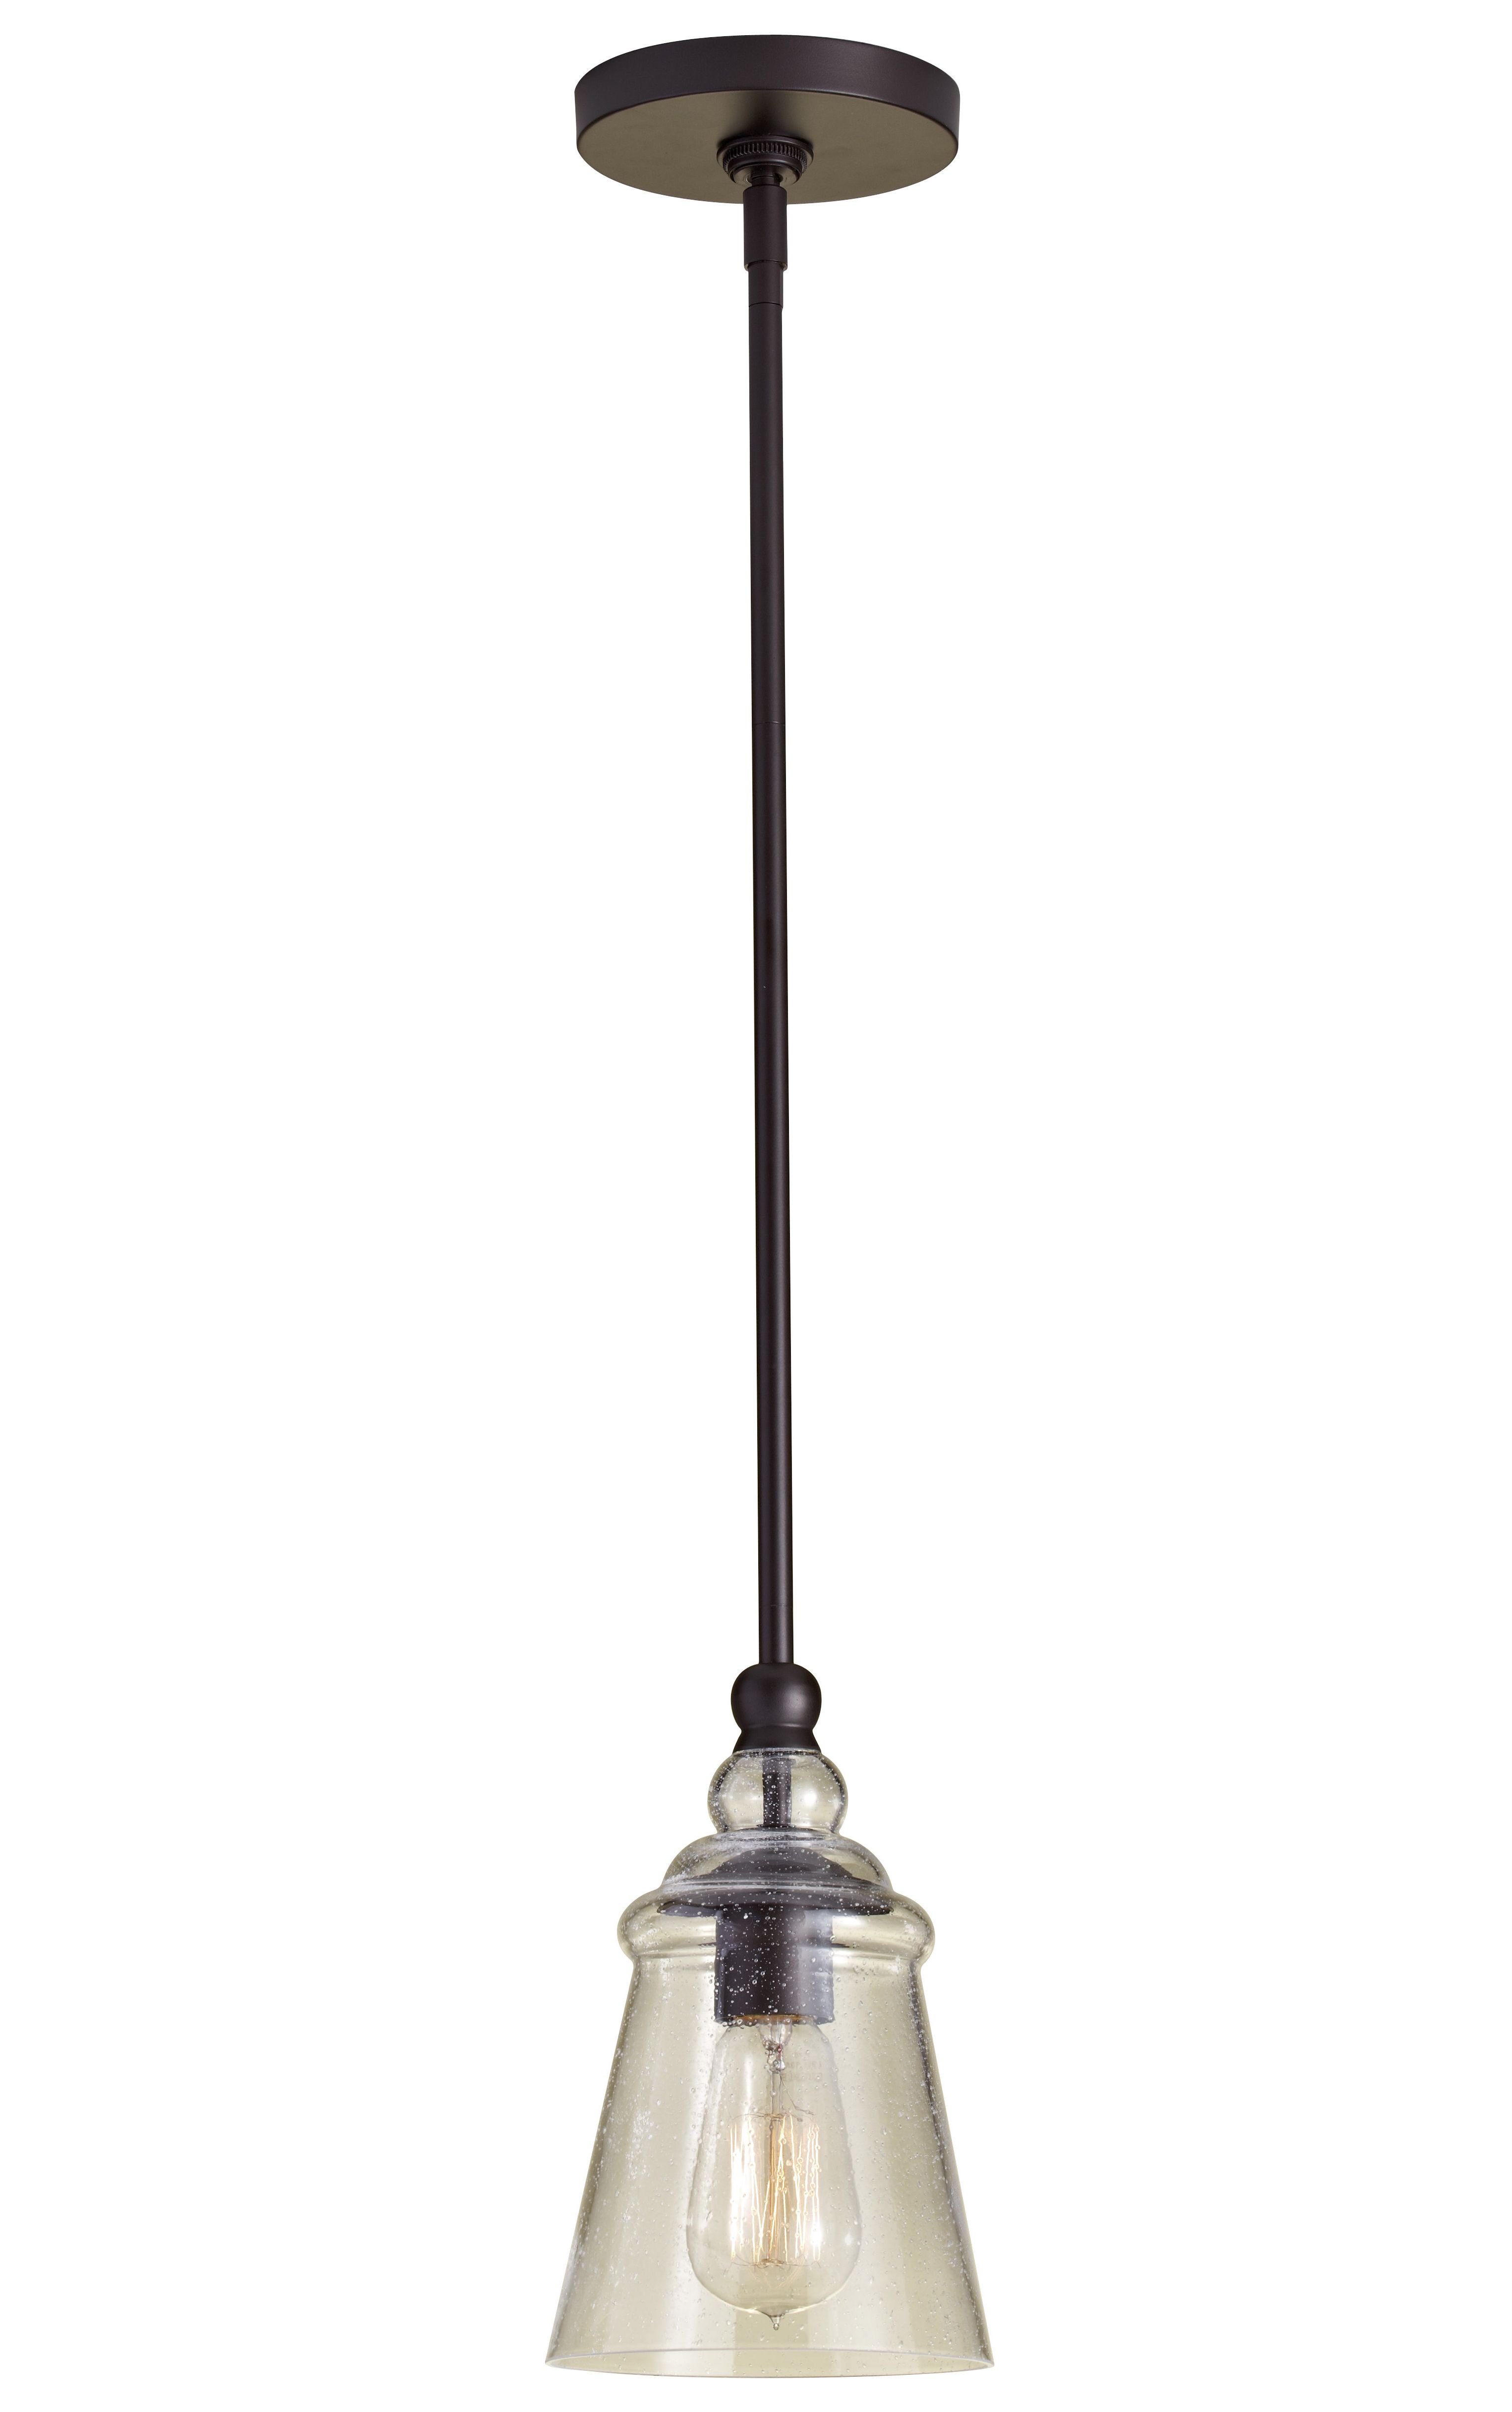 Sargent 1 Light Single Bell Pendants With 2019 Sargent 1 Light Single Bell Pendant (View 1 of 25)